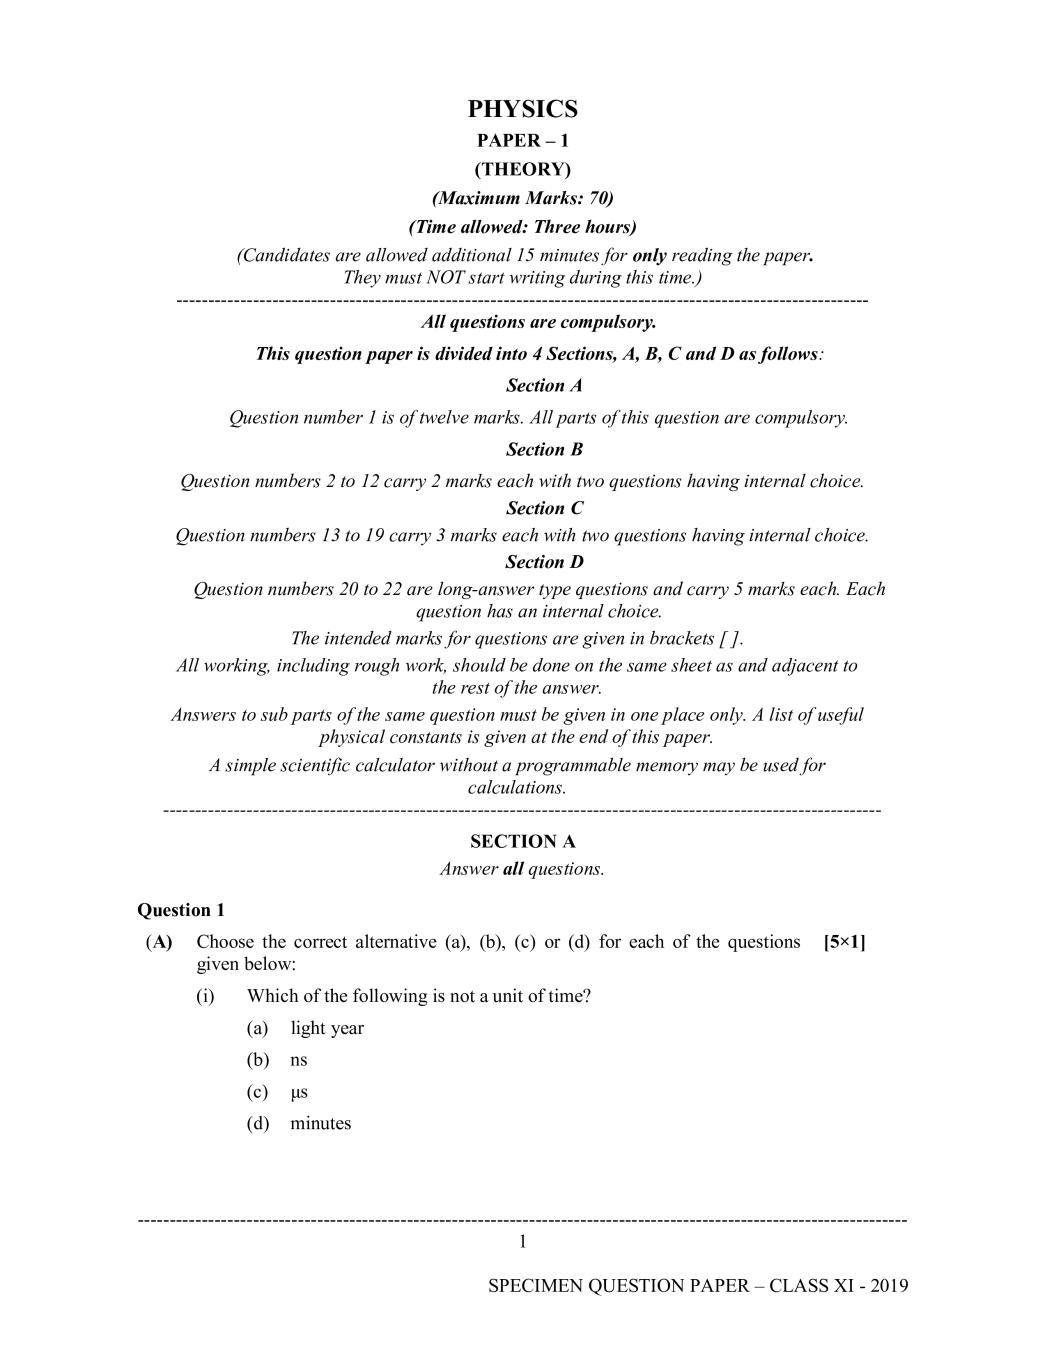 ISC Class 11 Specimen Paper 2019 for Physics - Page 1